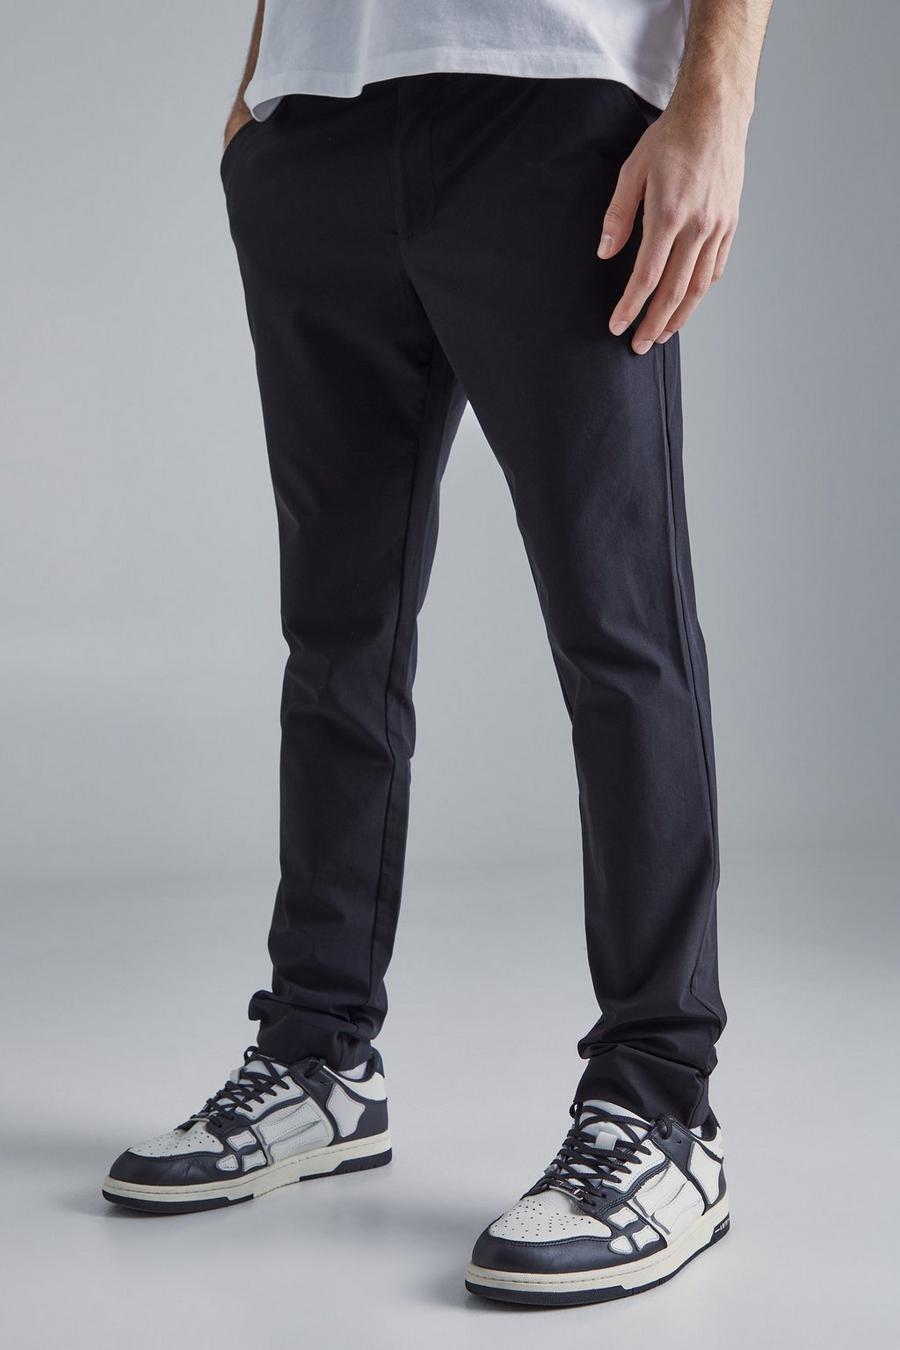 Black Technical Stretch Tailored Slim Fit Pants